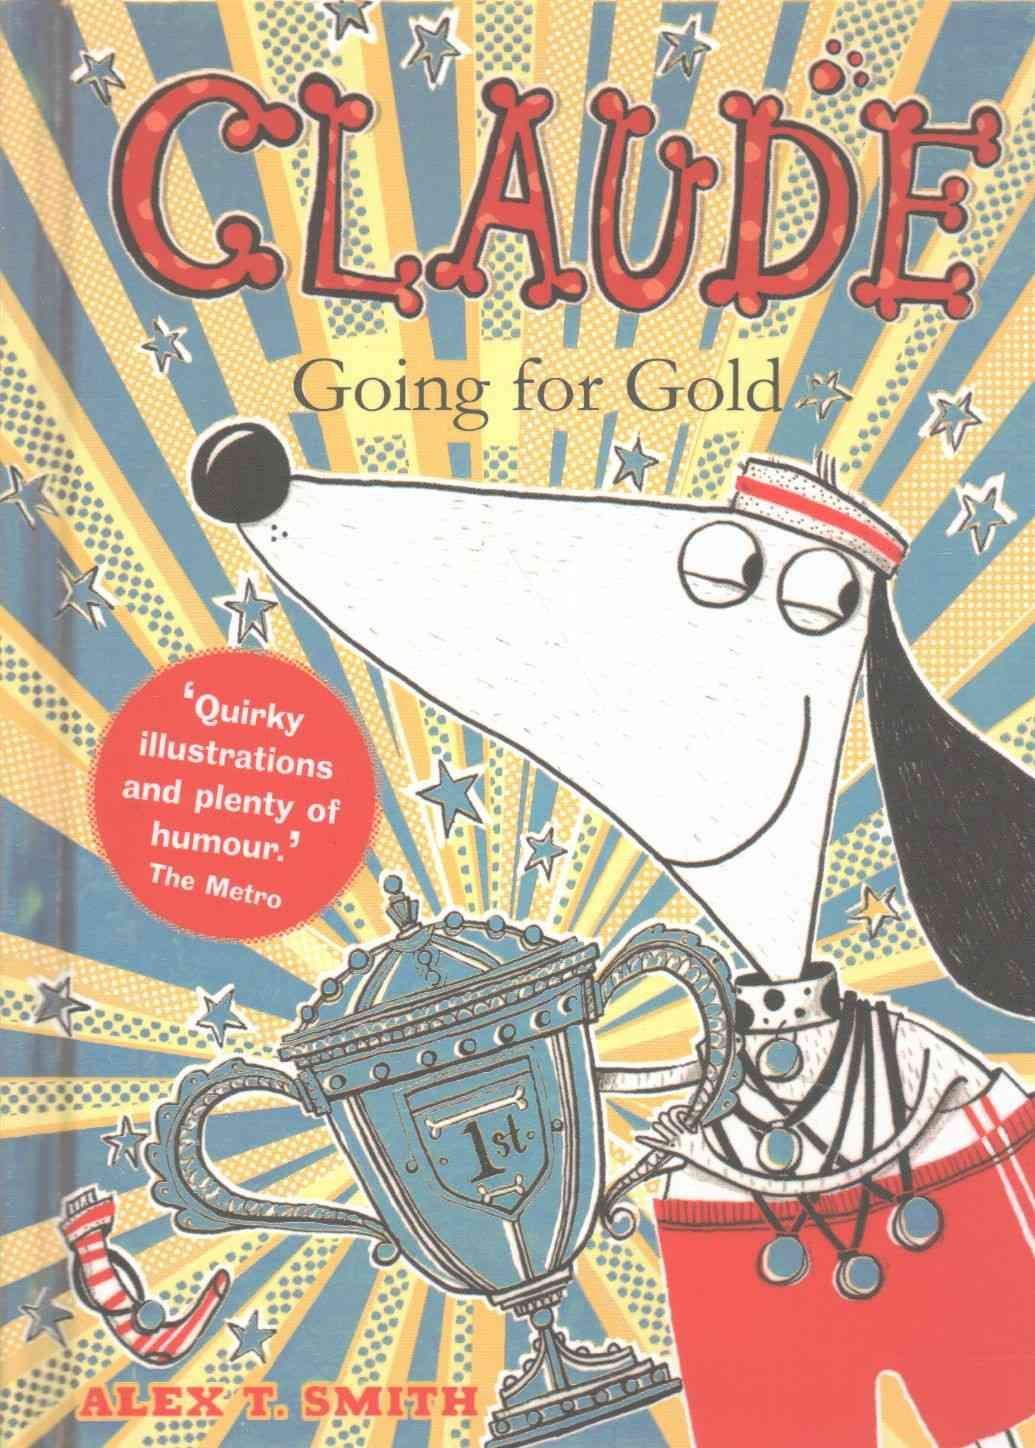 Claude Going for Gold!